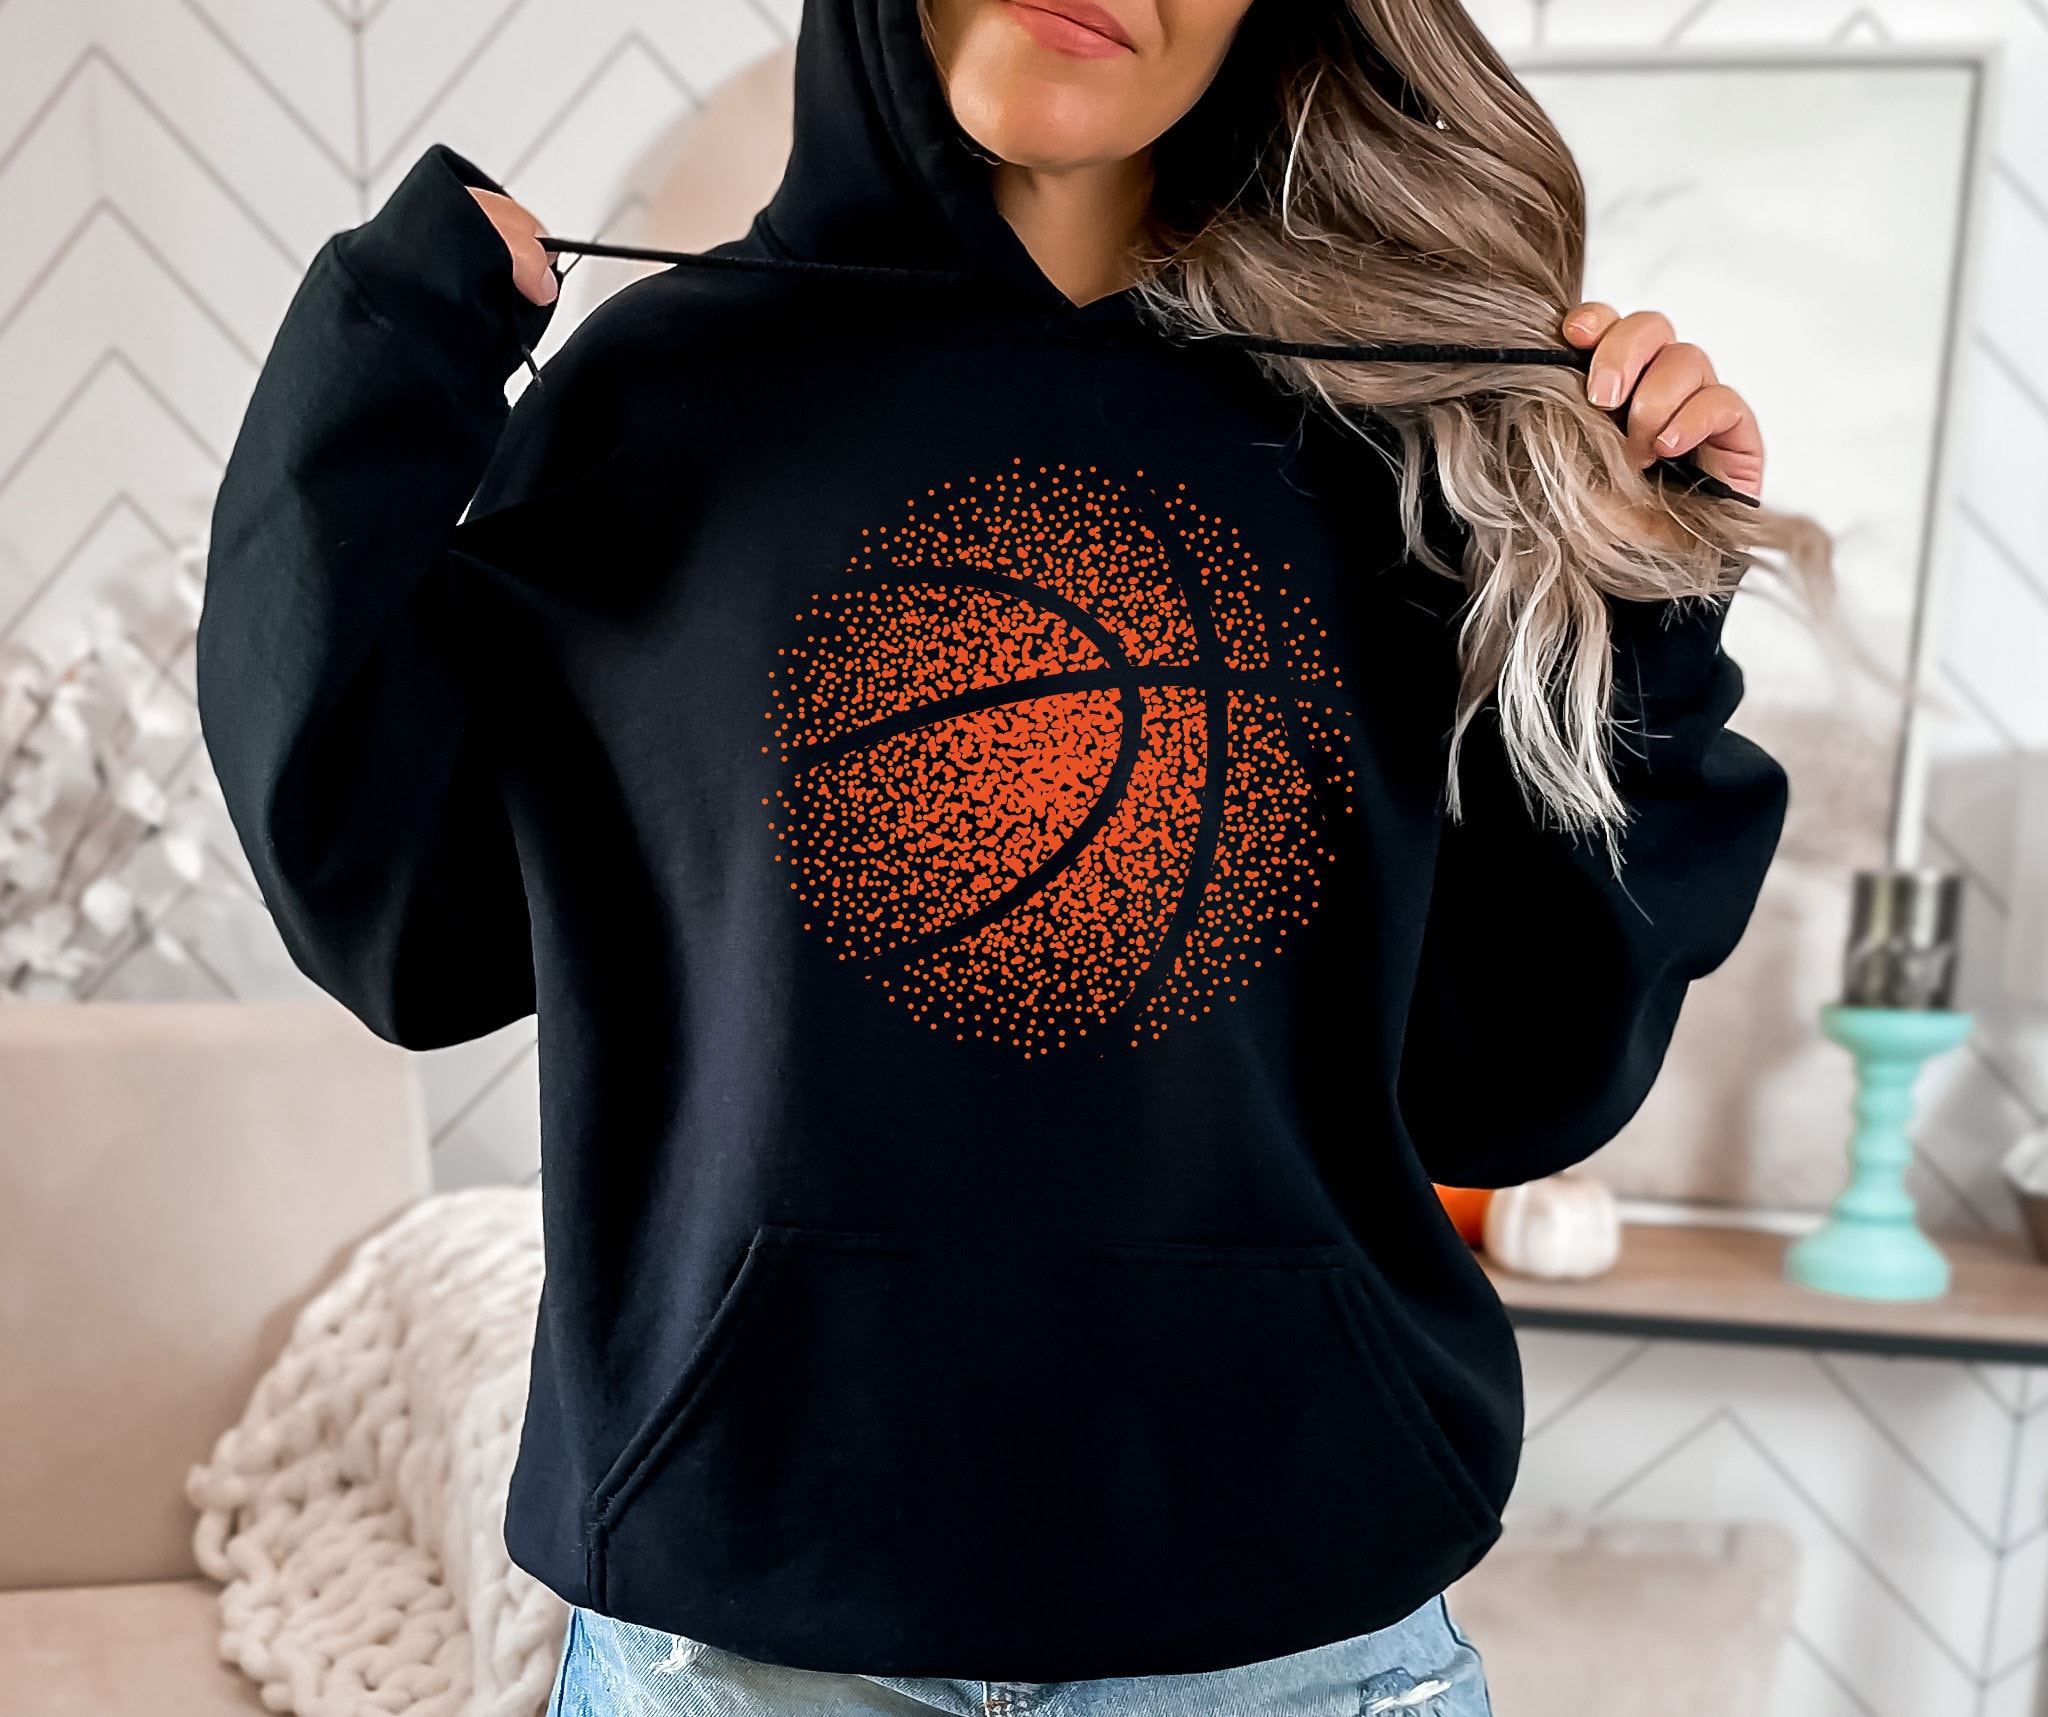 Basketball And Sports Letter Print Hoodie, Cool Hoodies For Men